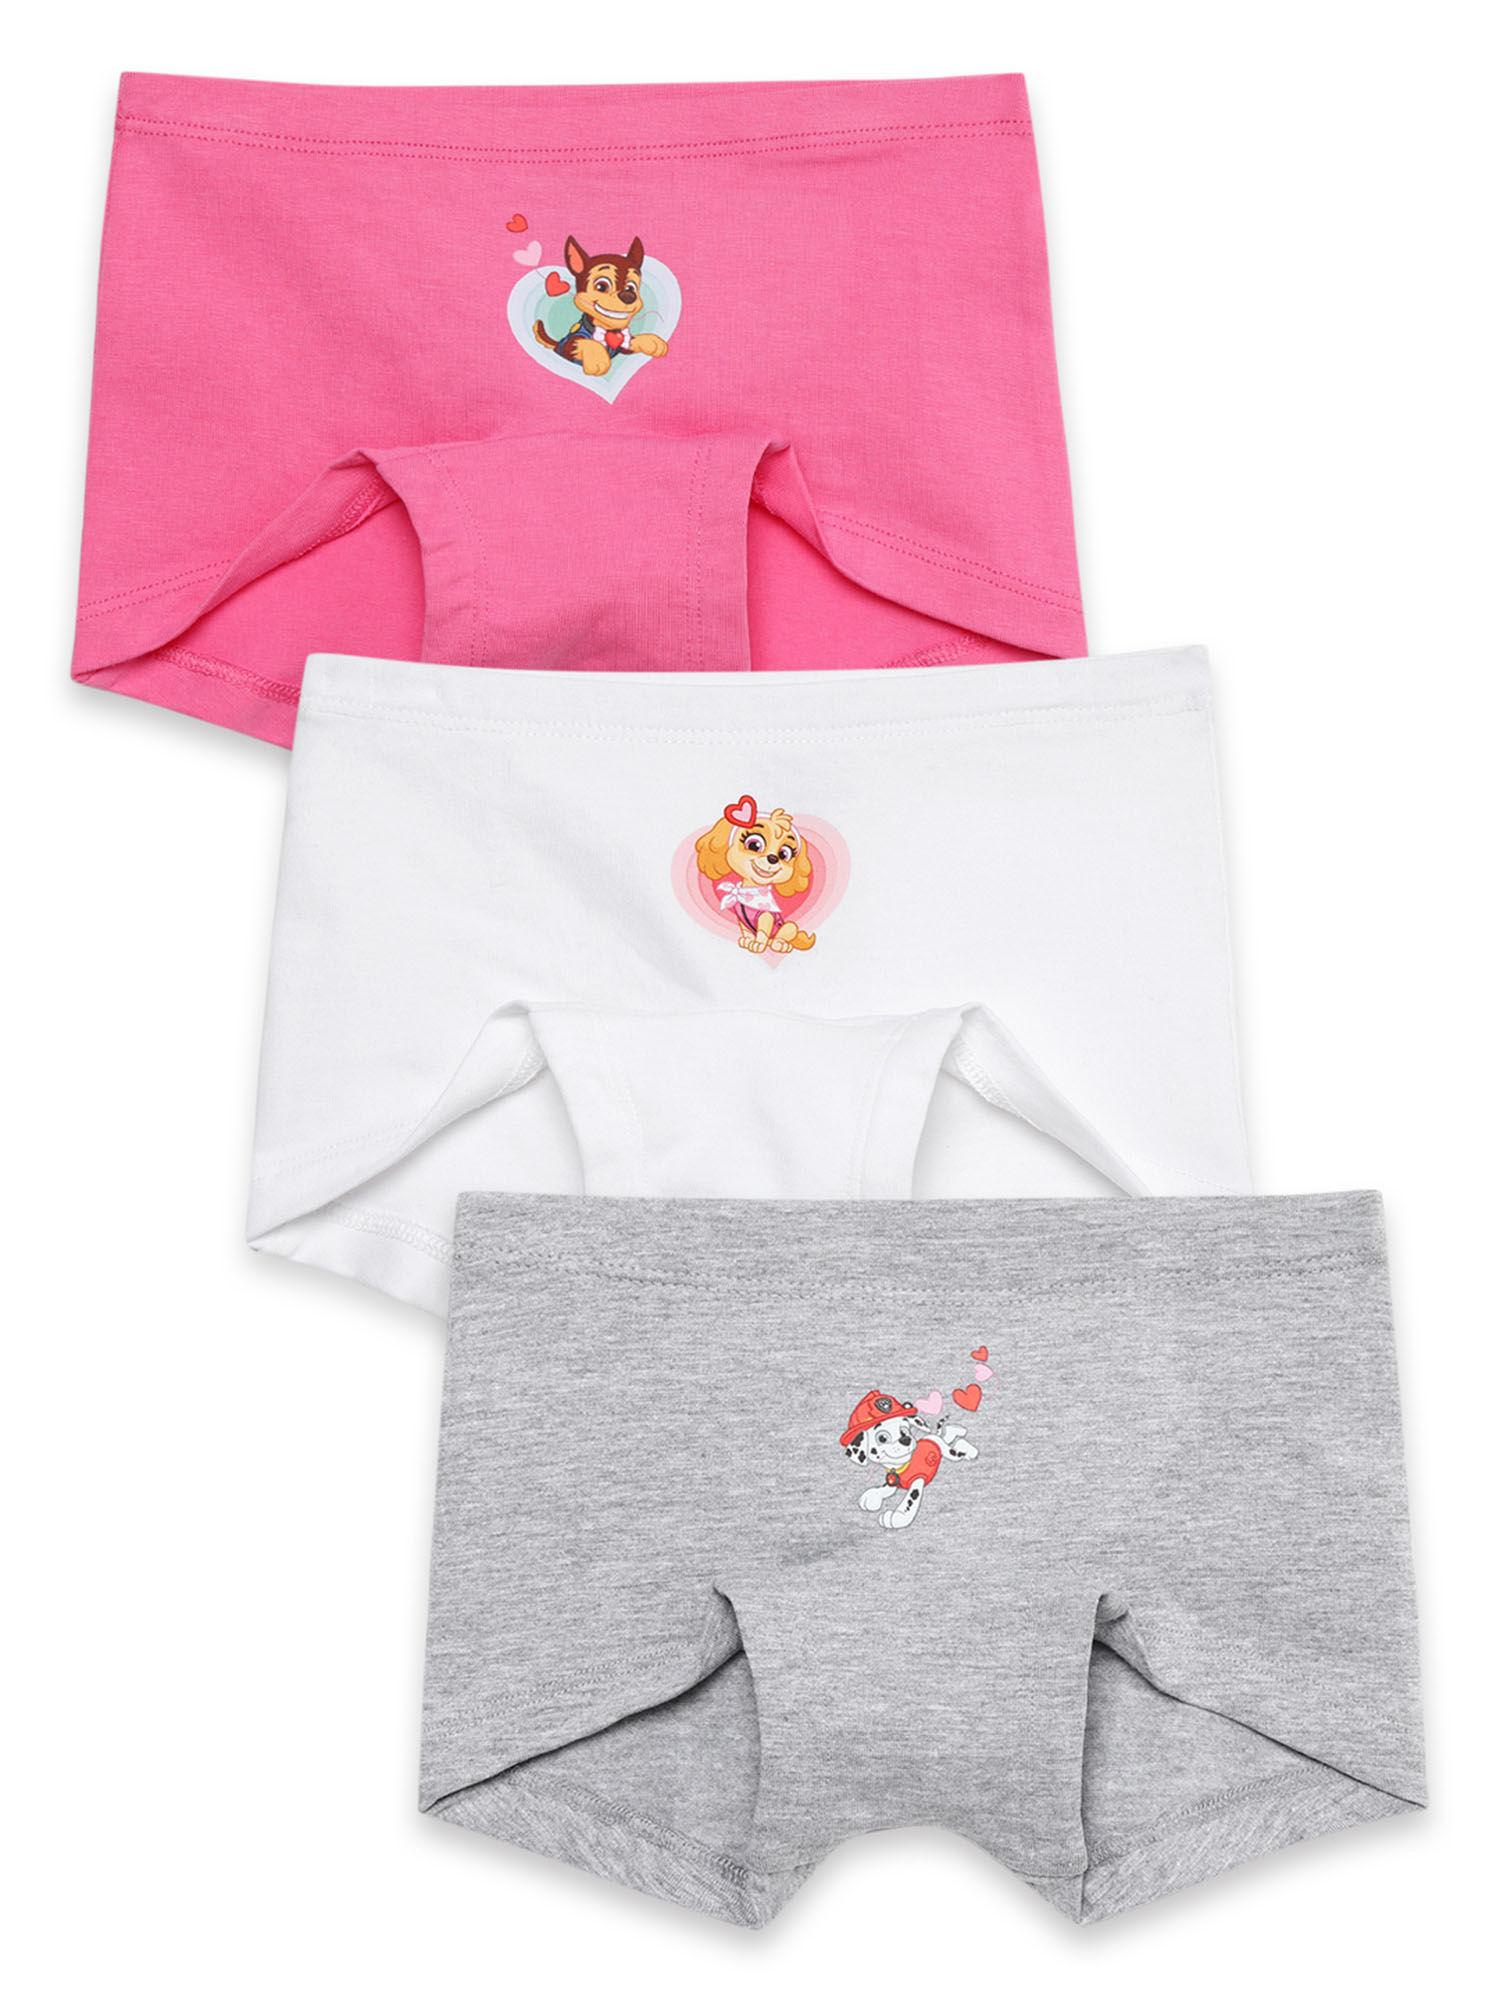 Girls Paw Patrol Boxer Briefs (Pack of 3)